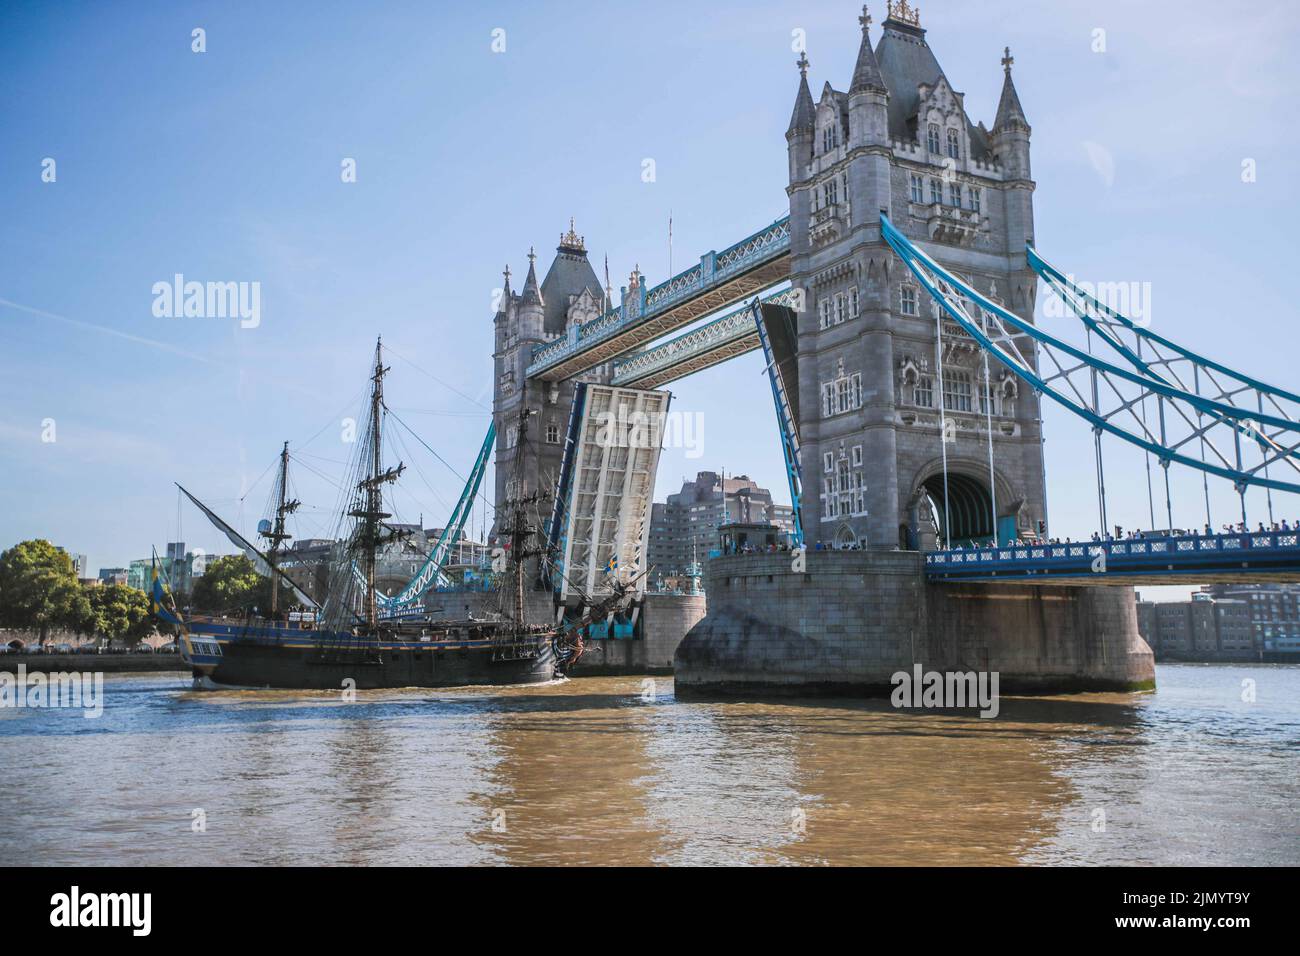 London UK 8 August 2022 Replica 18th century Swedish ship Götheborg sailed into London today. for few minutes before heading back to India dock were it be moored and open to visitro until 12 August 2022 Paul Quezada-Neiman/Alamy Live News Stock Photo